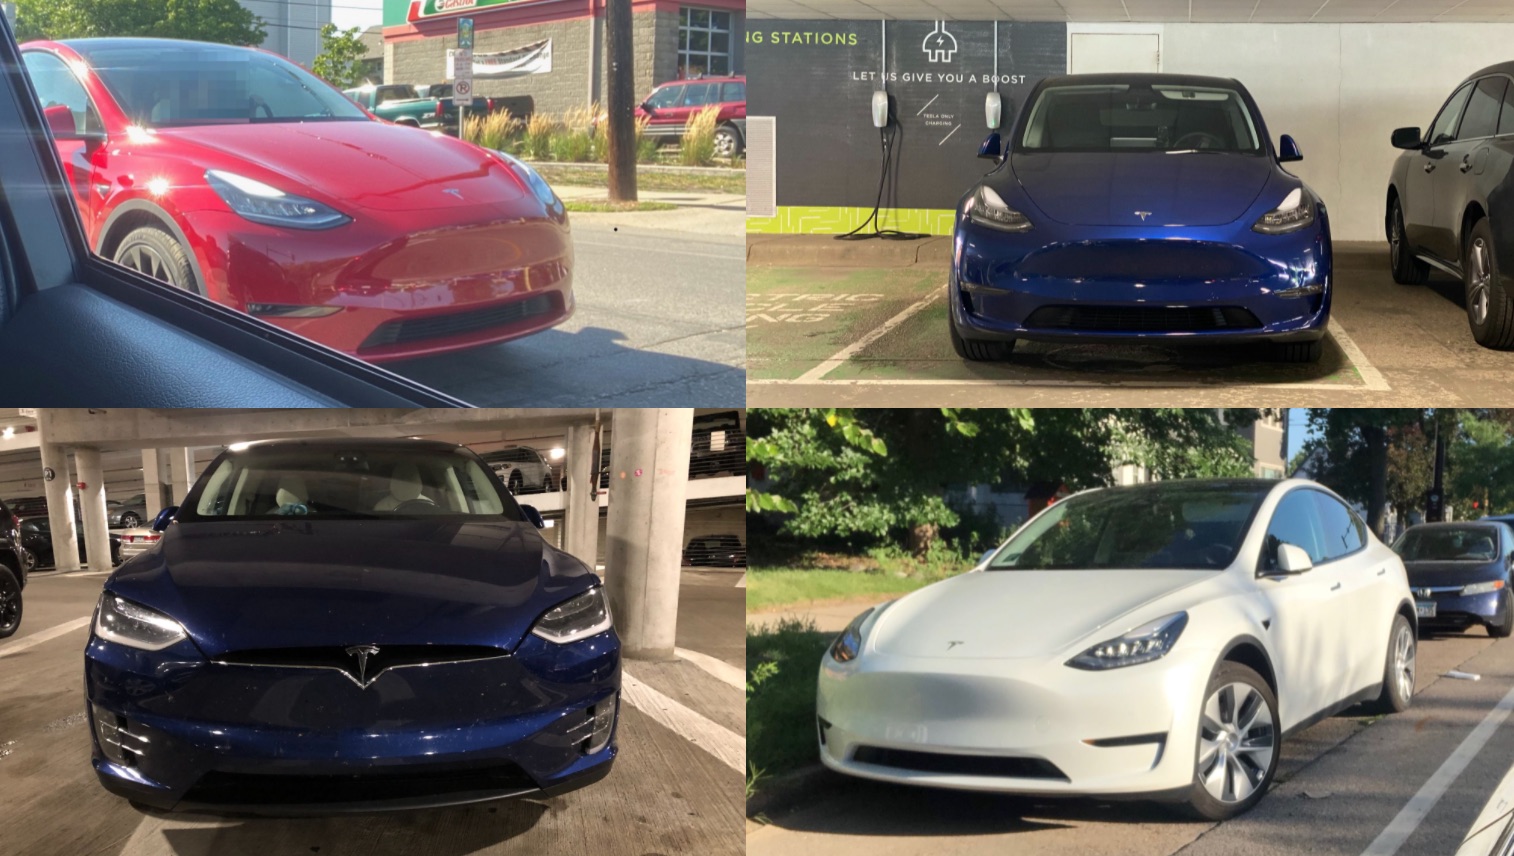 four teslas: one red, one white, and two blue. none of them have front license plates.